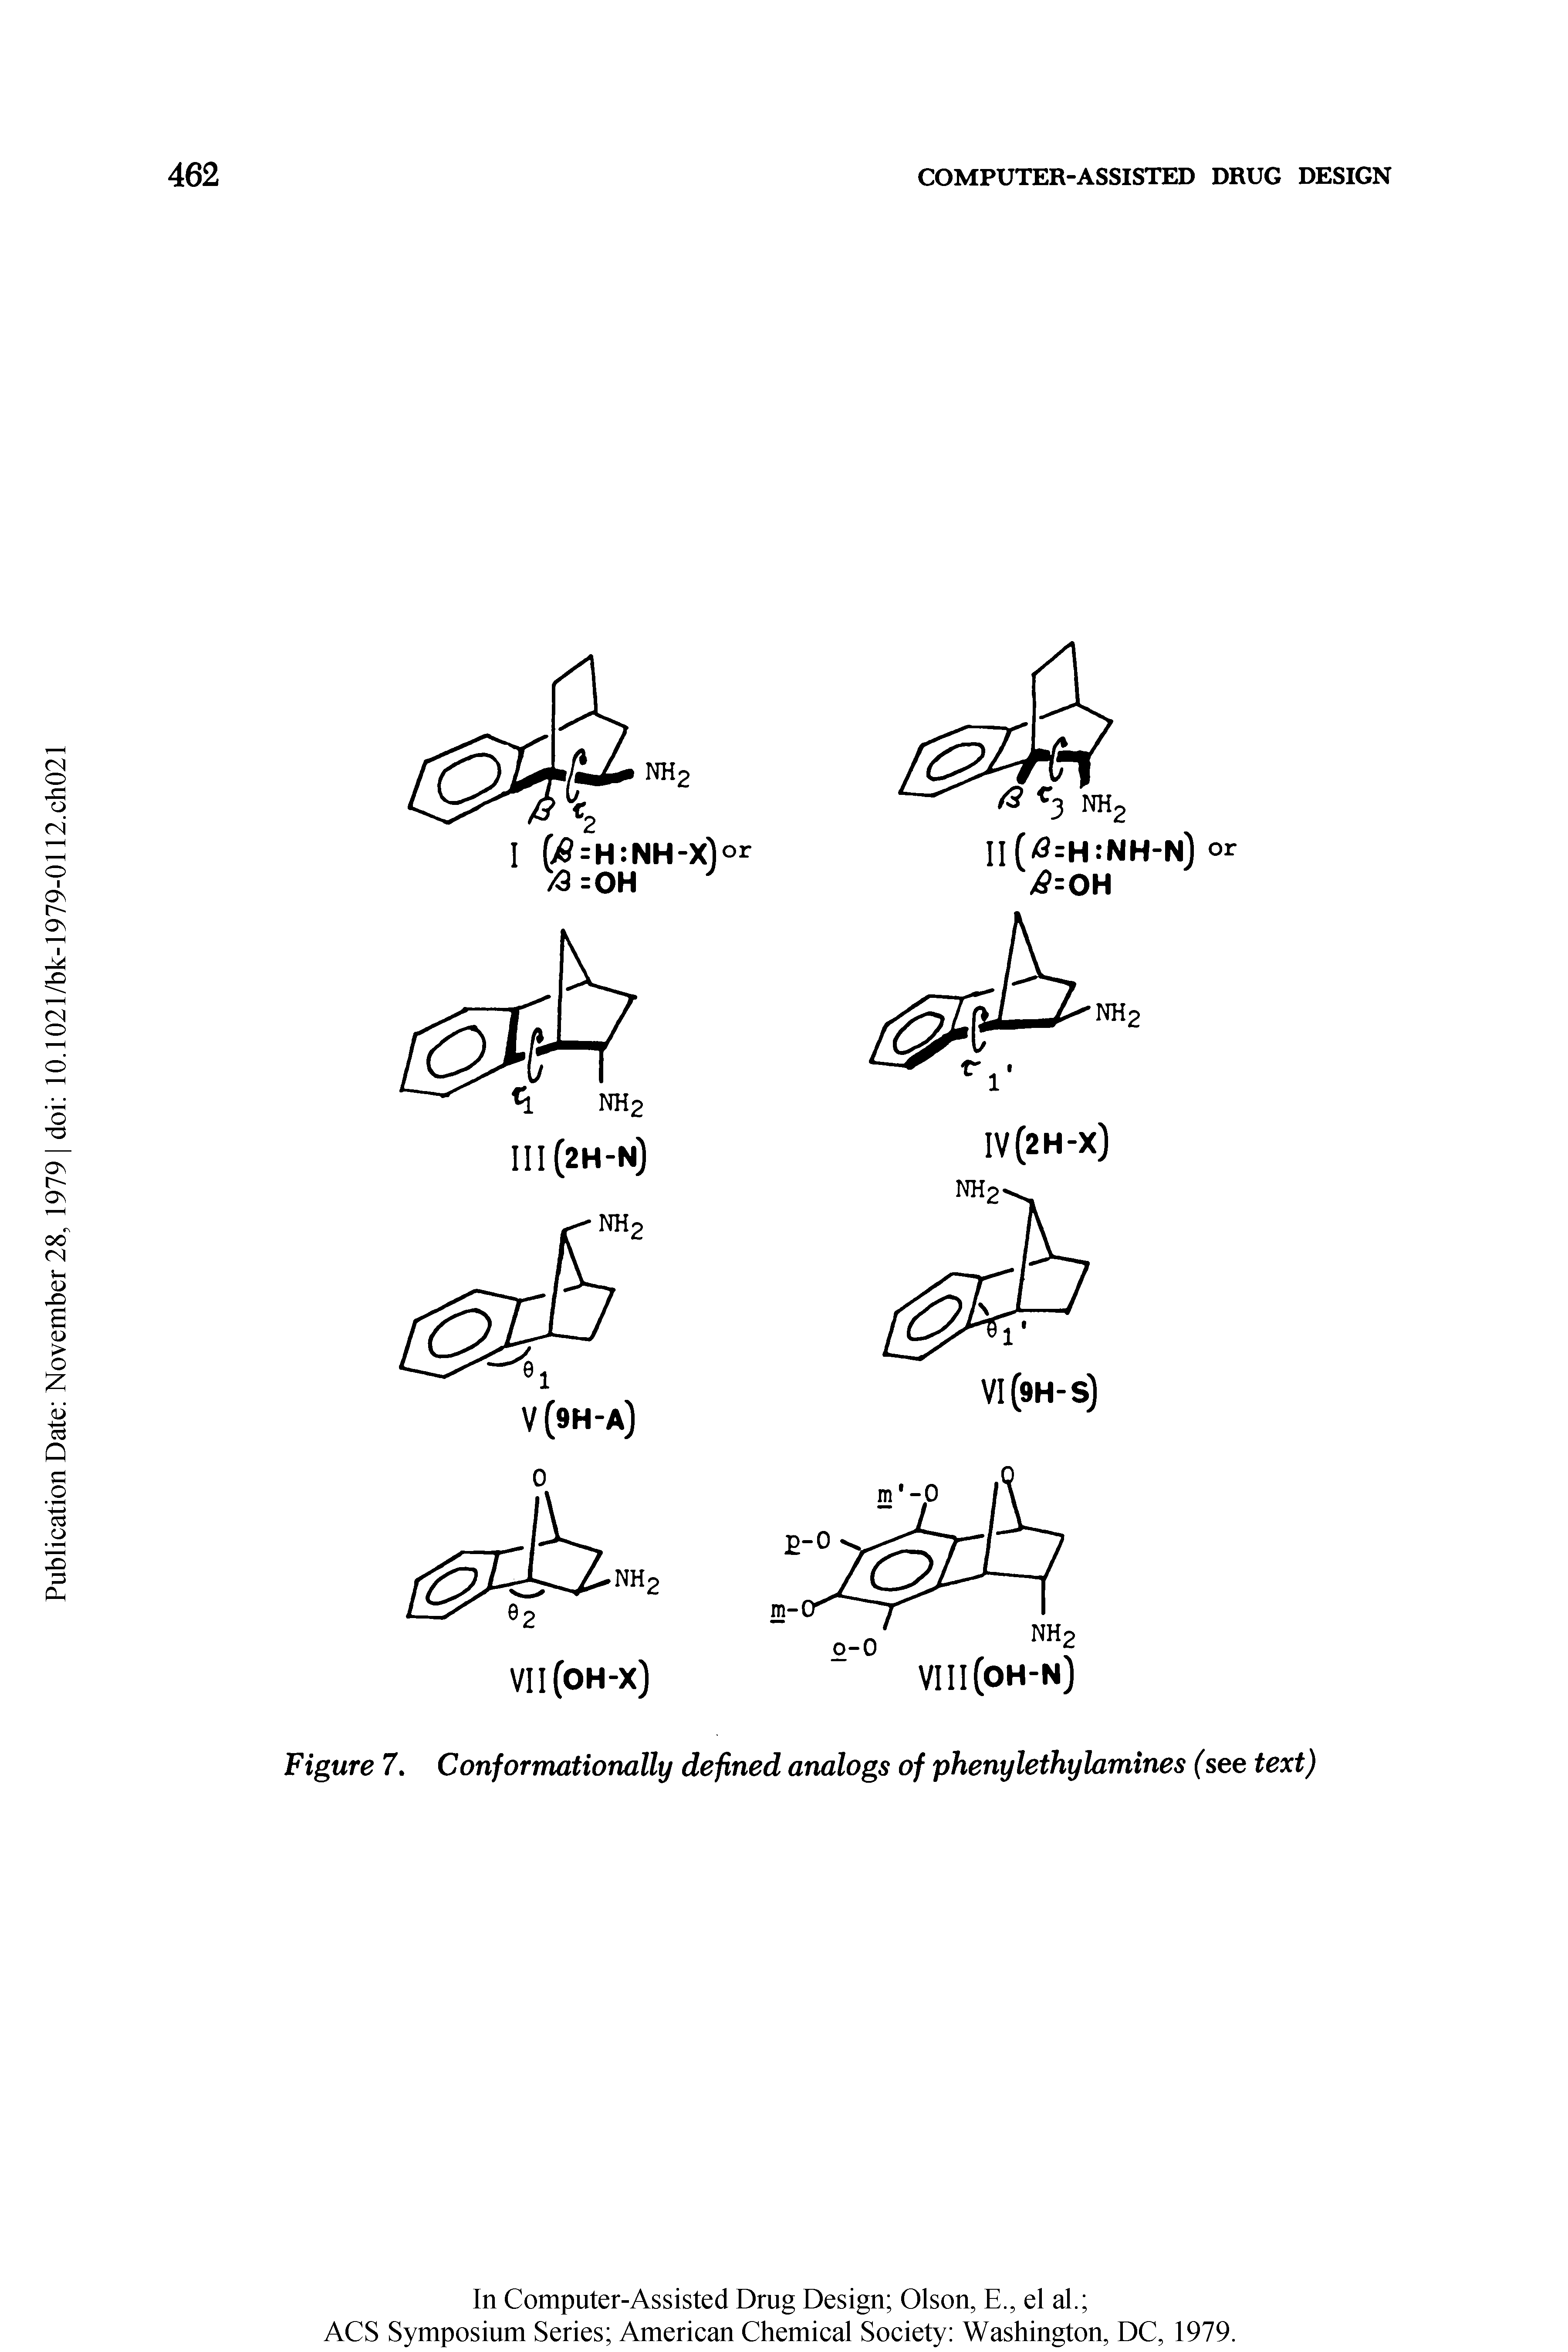 Figure 7. Conformationally defined analogs of phenylethylamines (see text)...